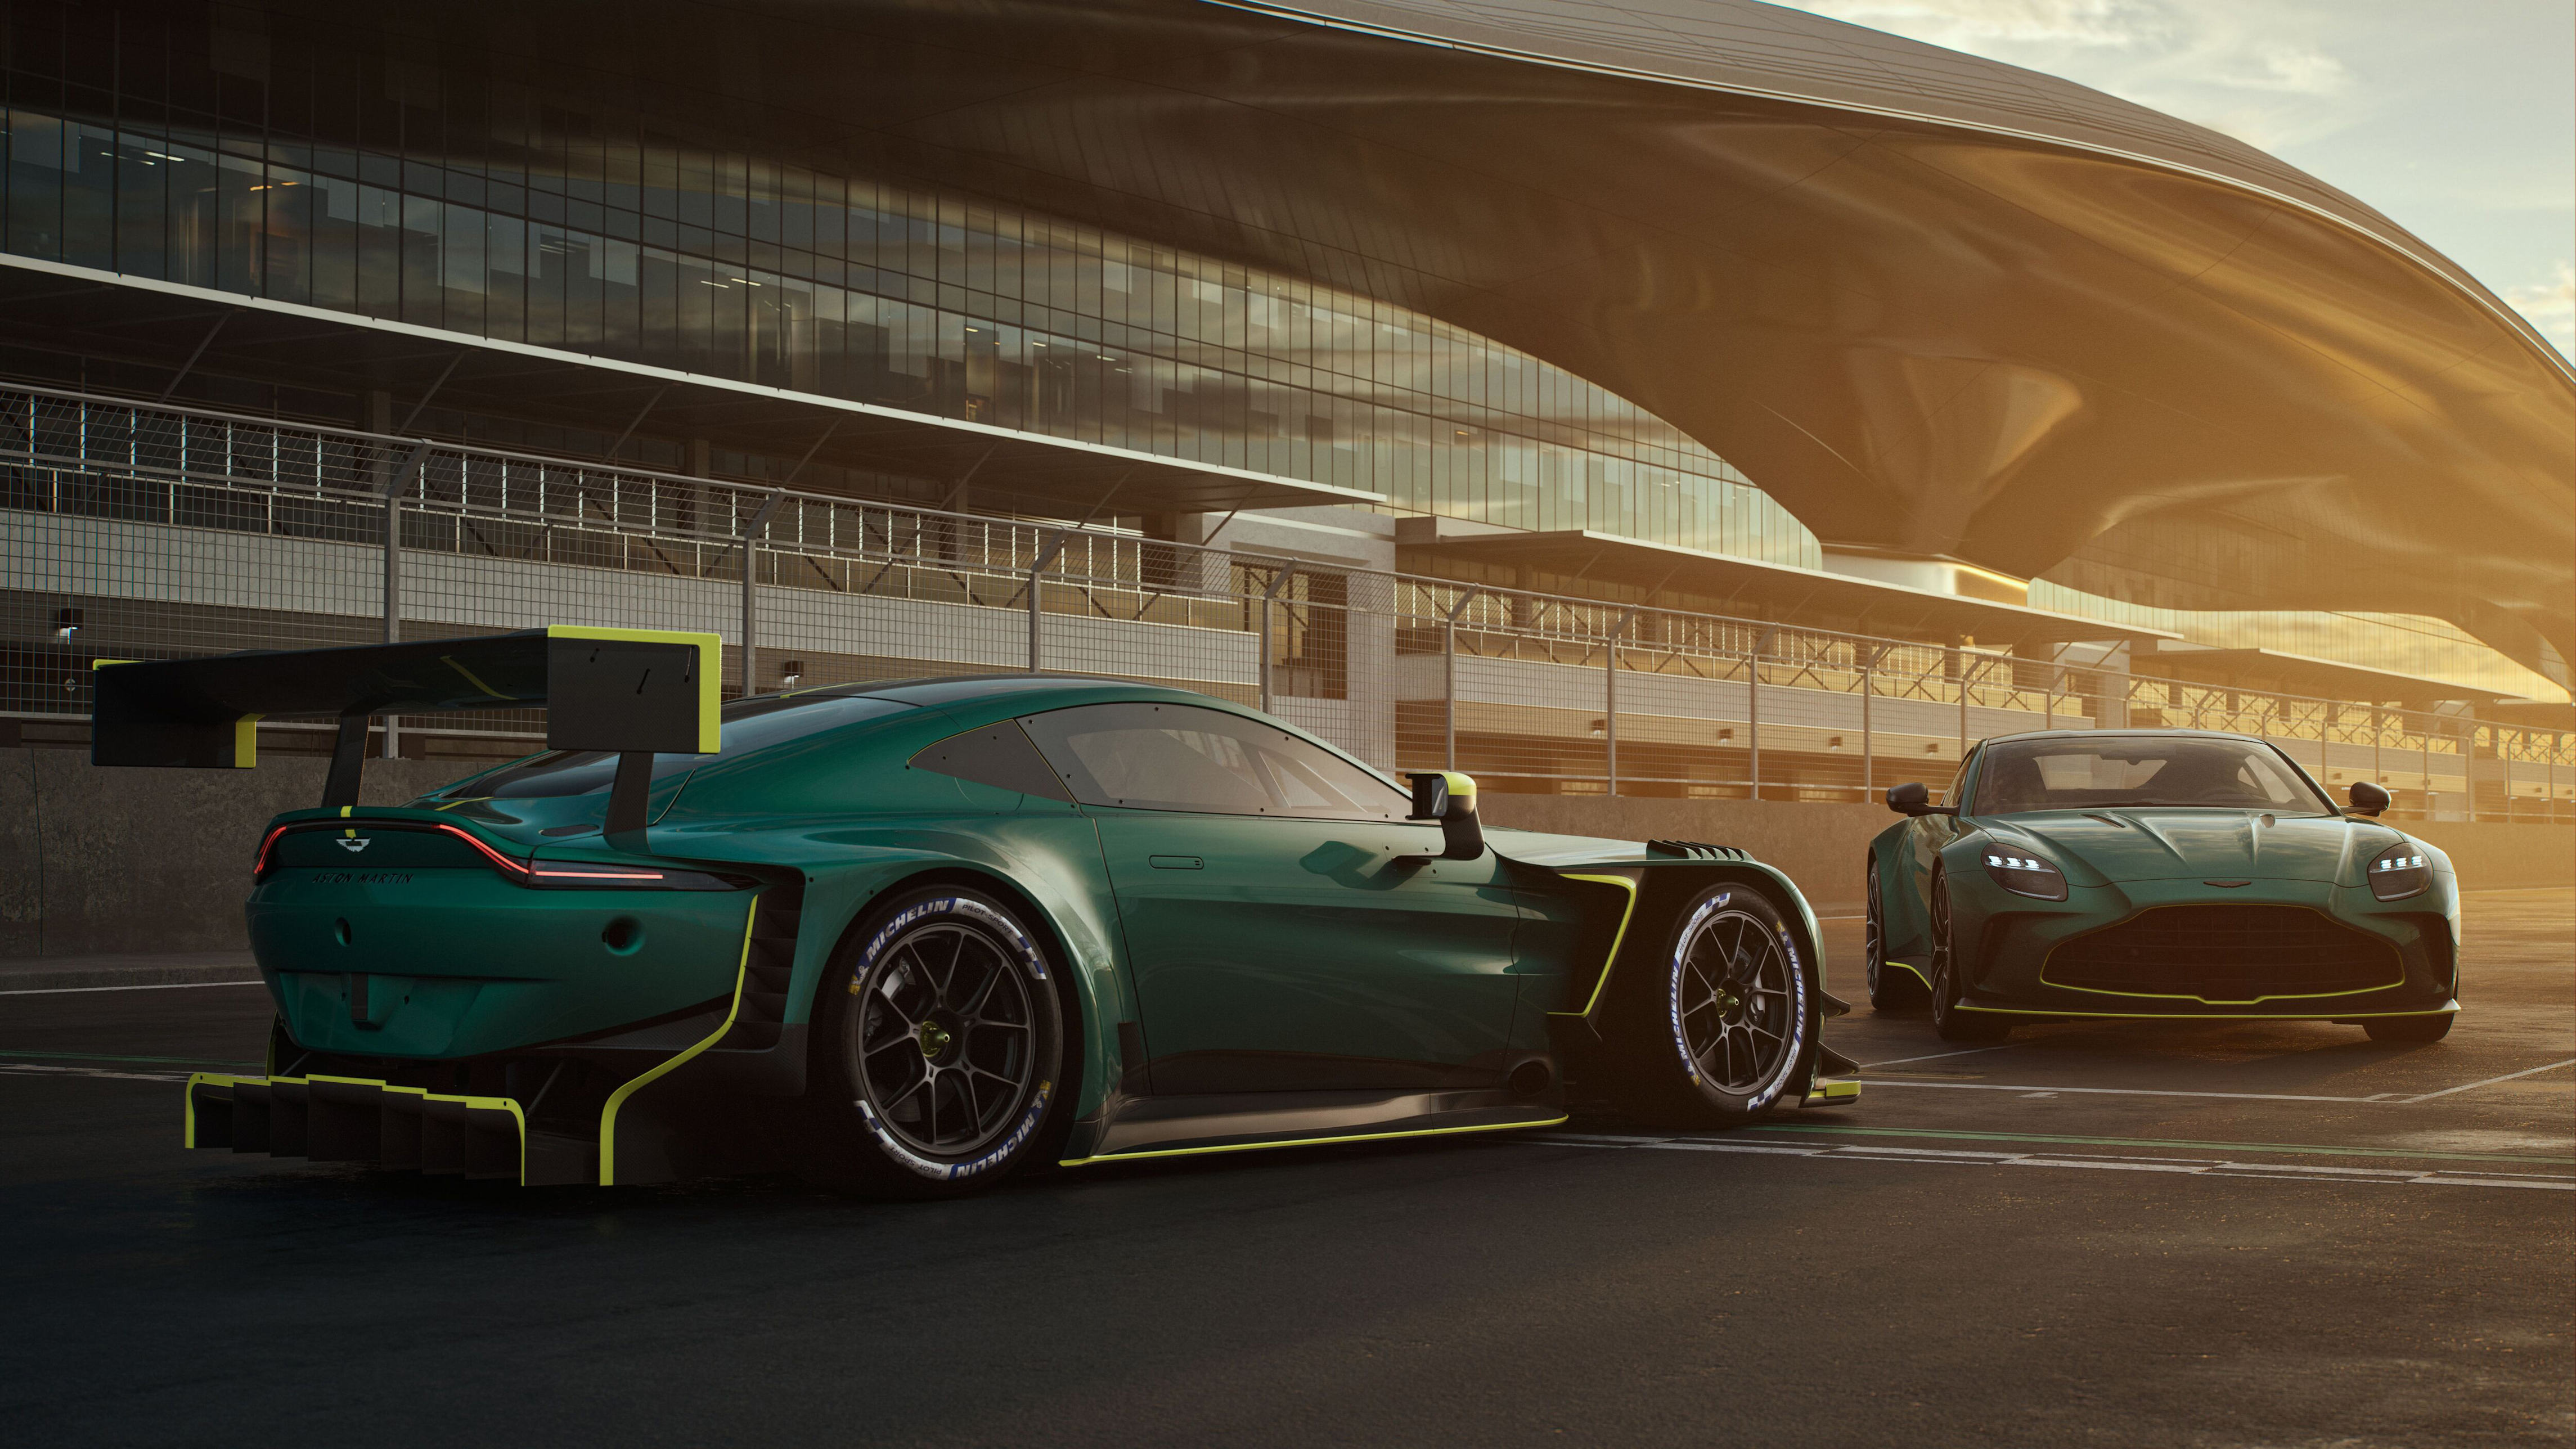 aston martin unveils new versions of vantage, gt3 and f1 car on same day